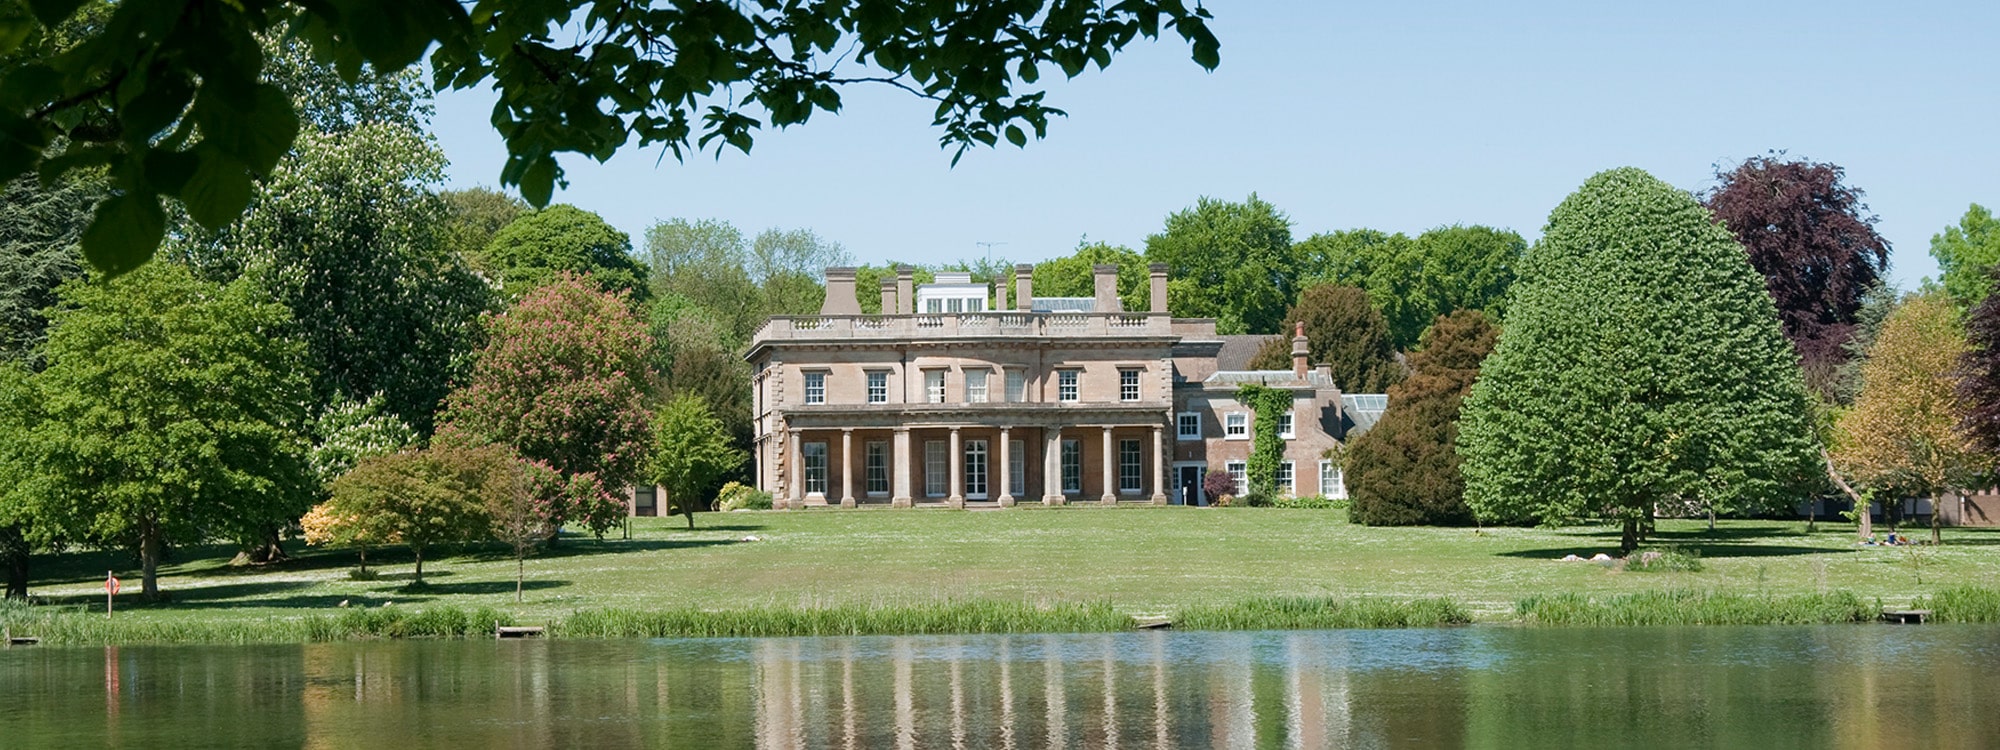 A manor overlooking a lake